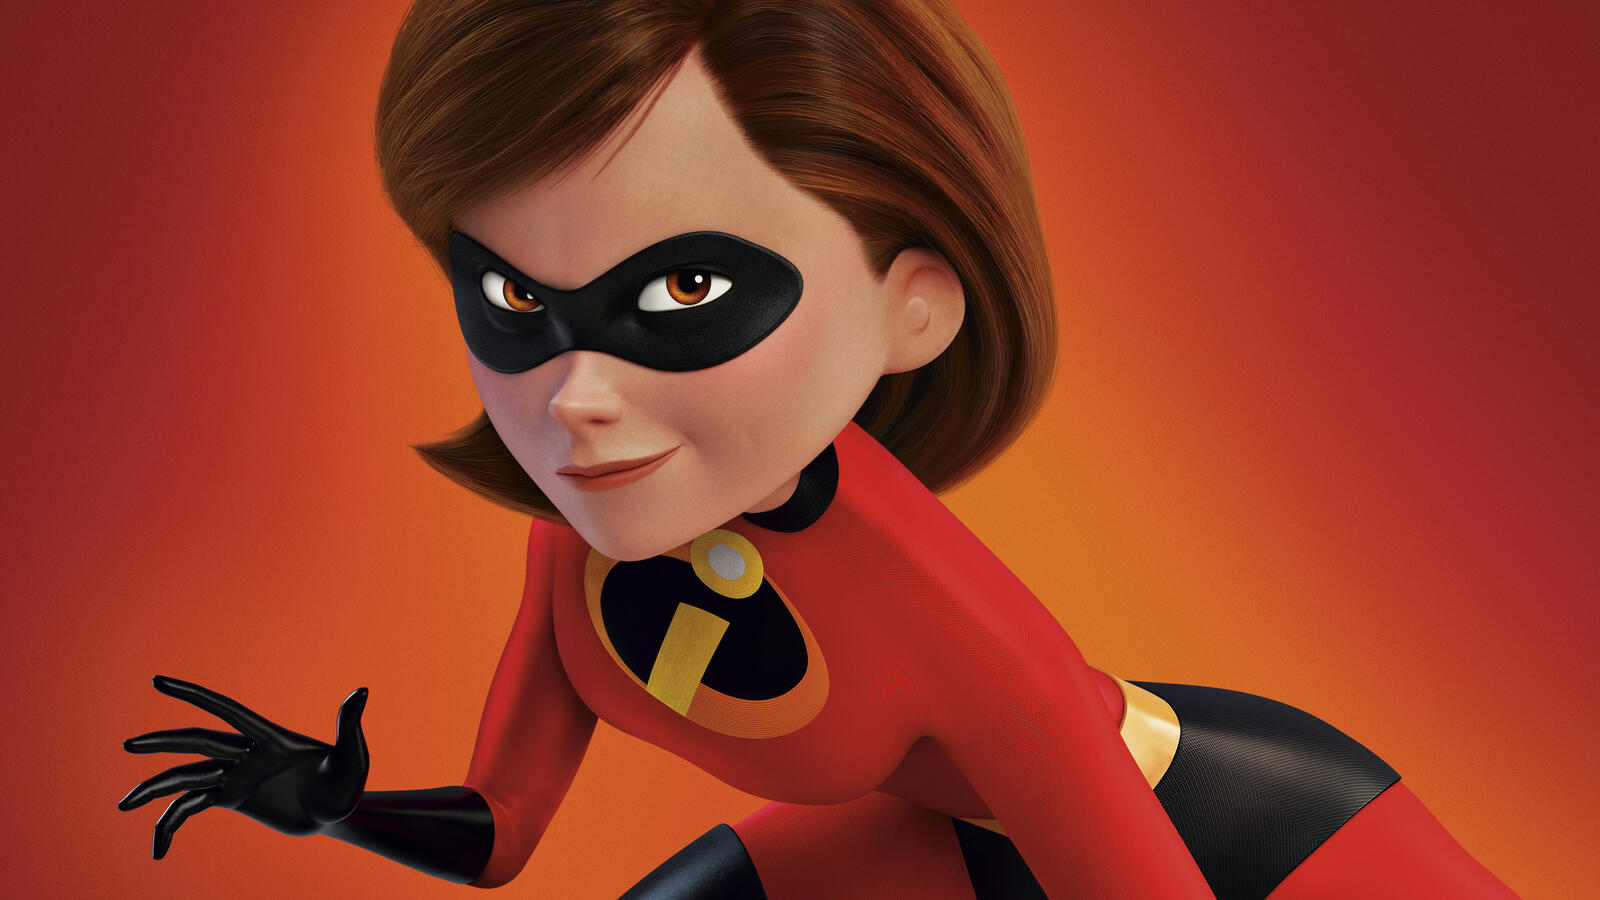 Wallpapers animated movies cinema The Incredibles 2 on the desktop